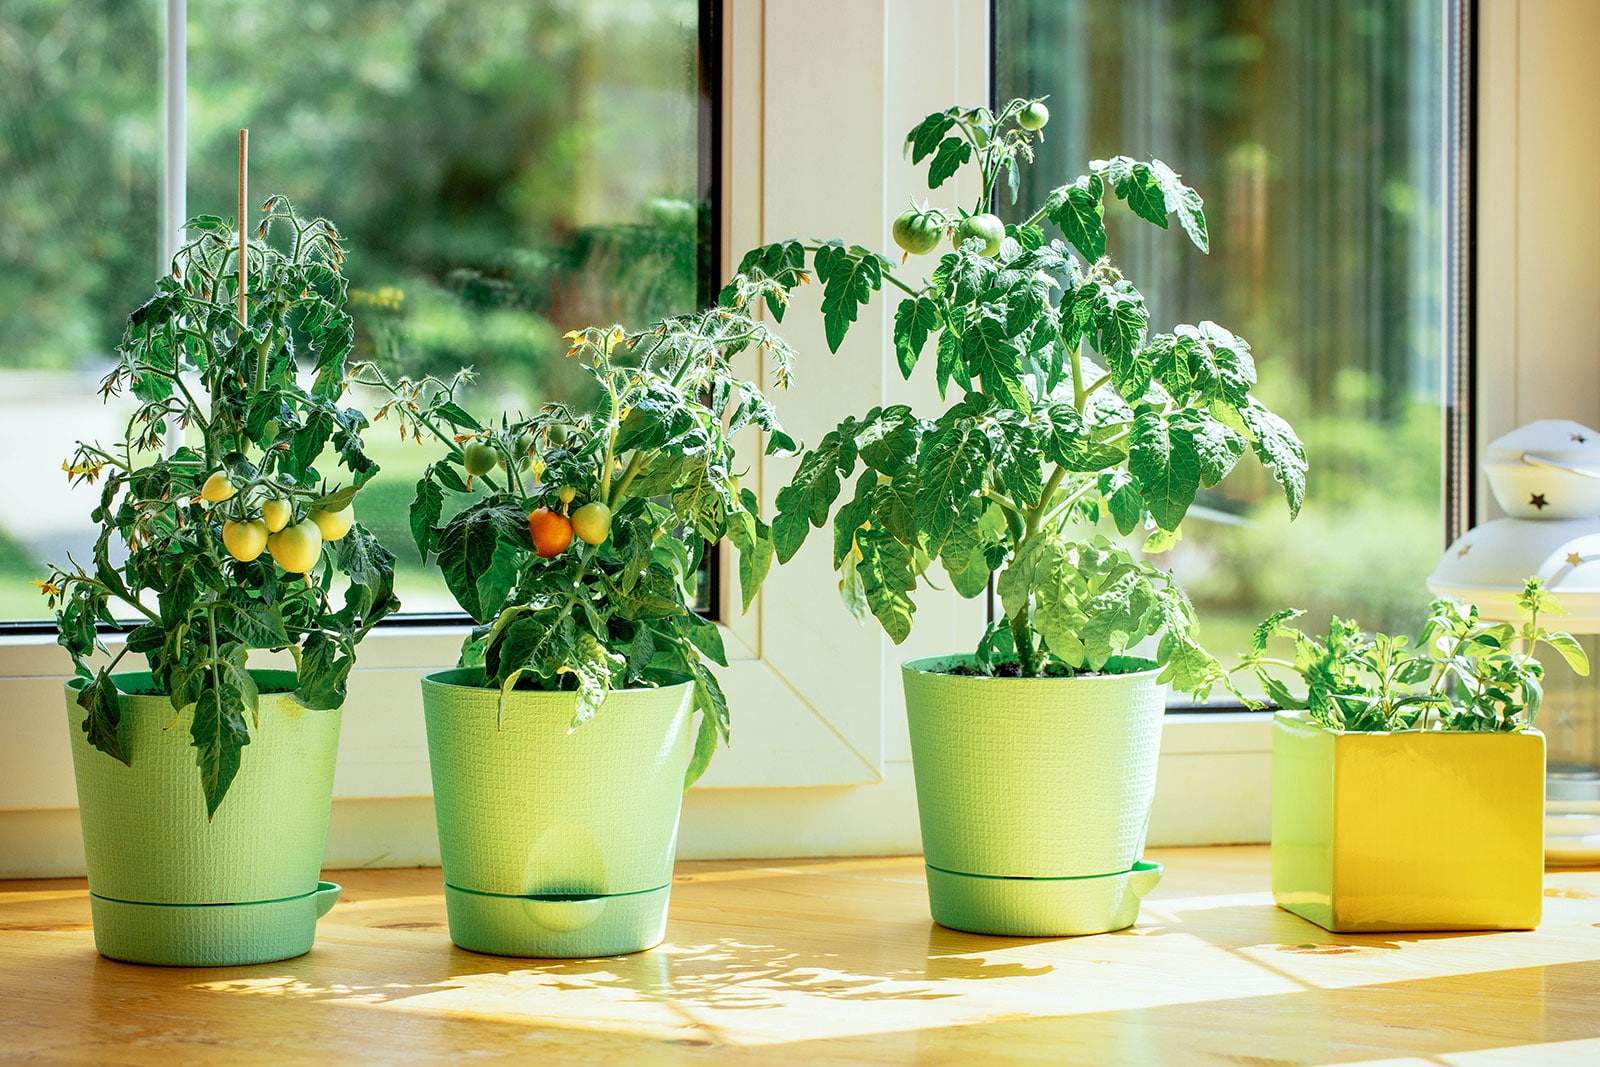 Potted tomato plants growing in a sunny bay window